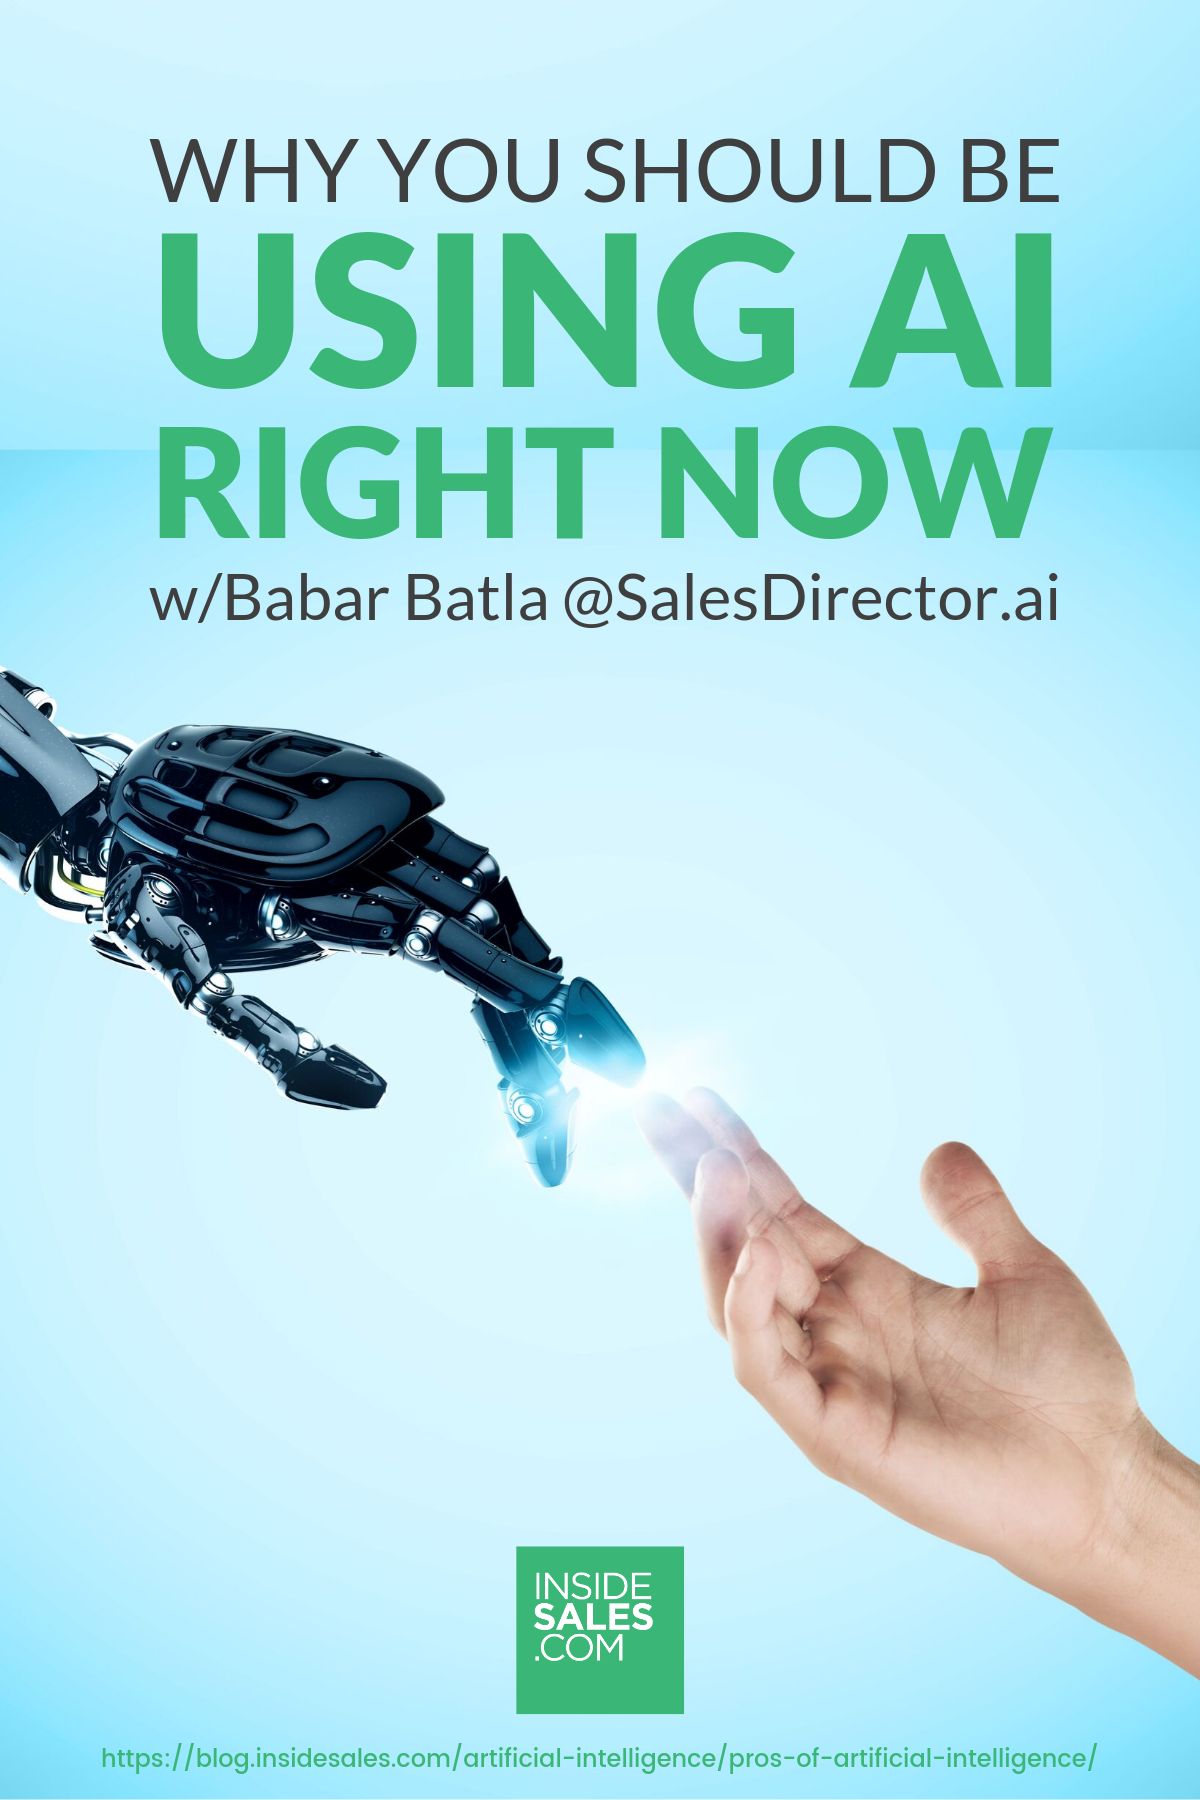 Why You Should Be Using AI Right Now w/Babar Batla @SalesDirector.ai https://resources.insidesales.com/blog/artificial-intelligence/pros-of-artificial-intelligence/